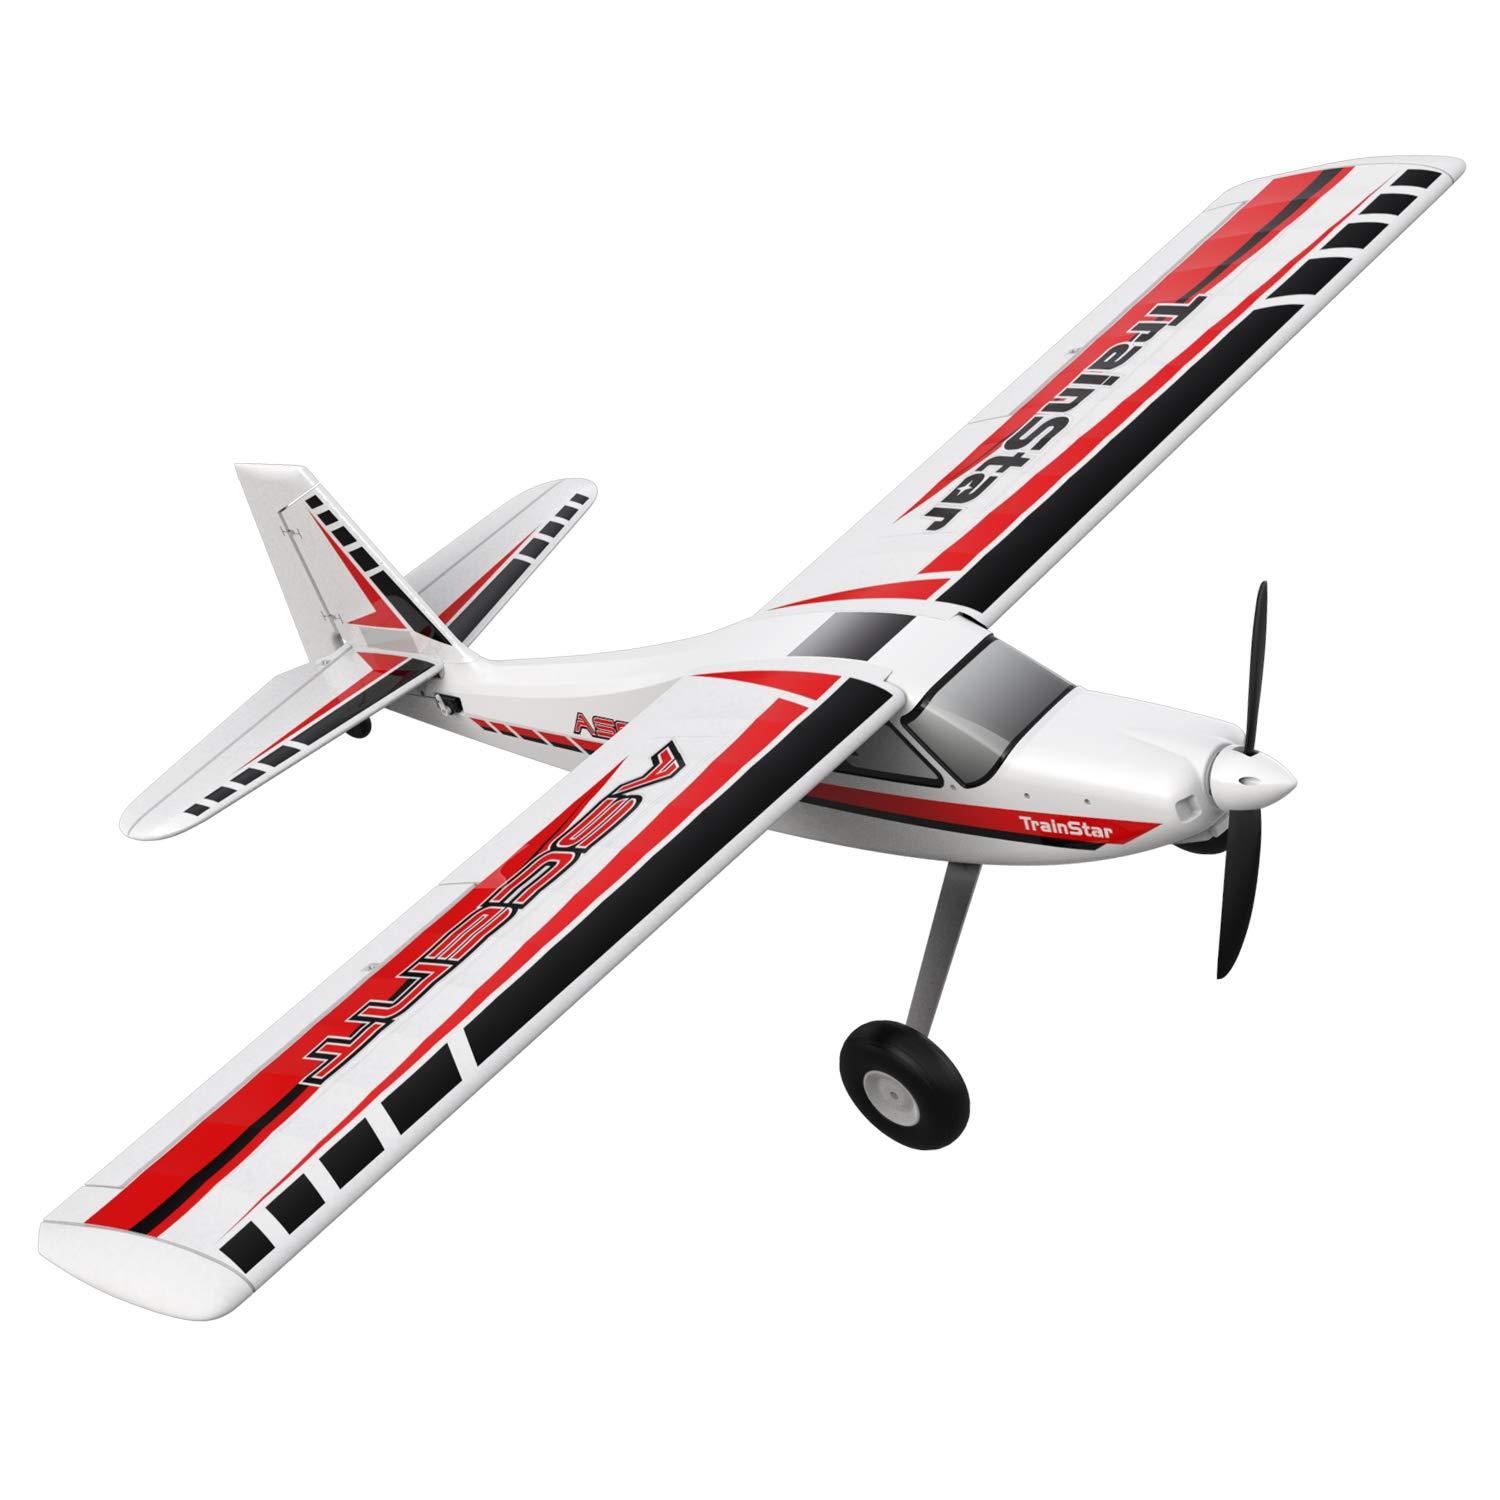 Airplanes Rc Remote Control: Experience the Thrill of RC Remote Control Airplanes